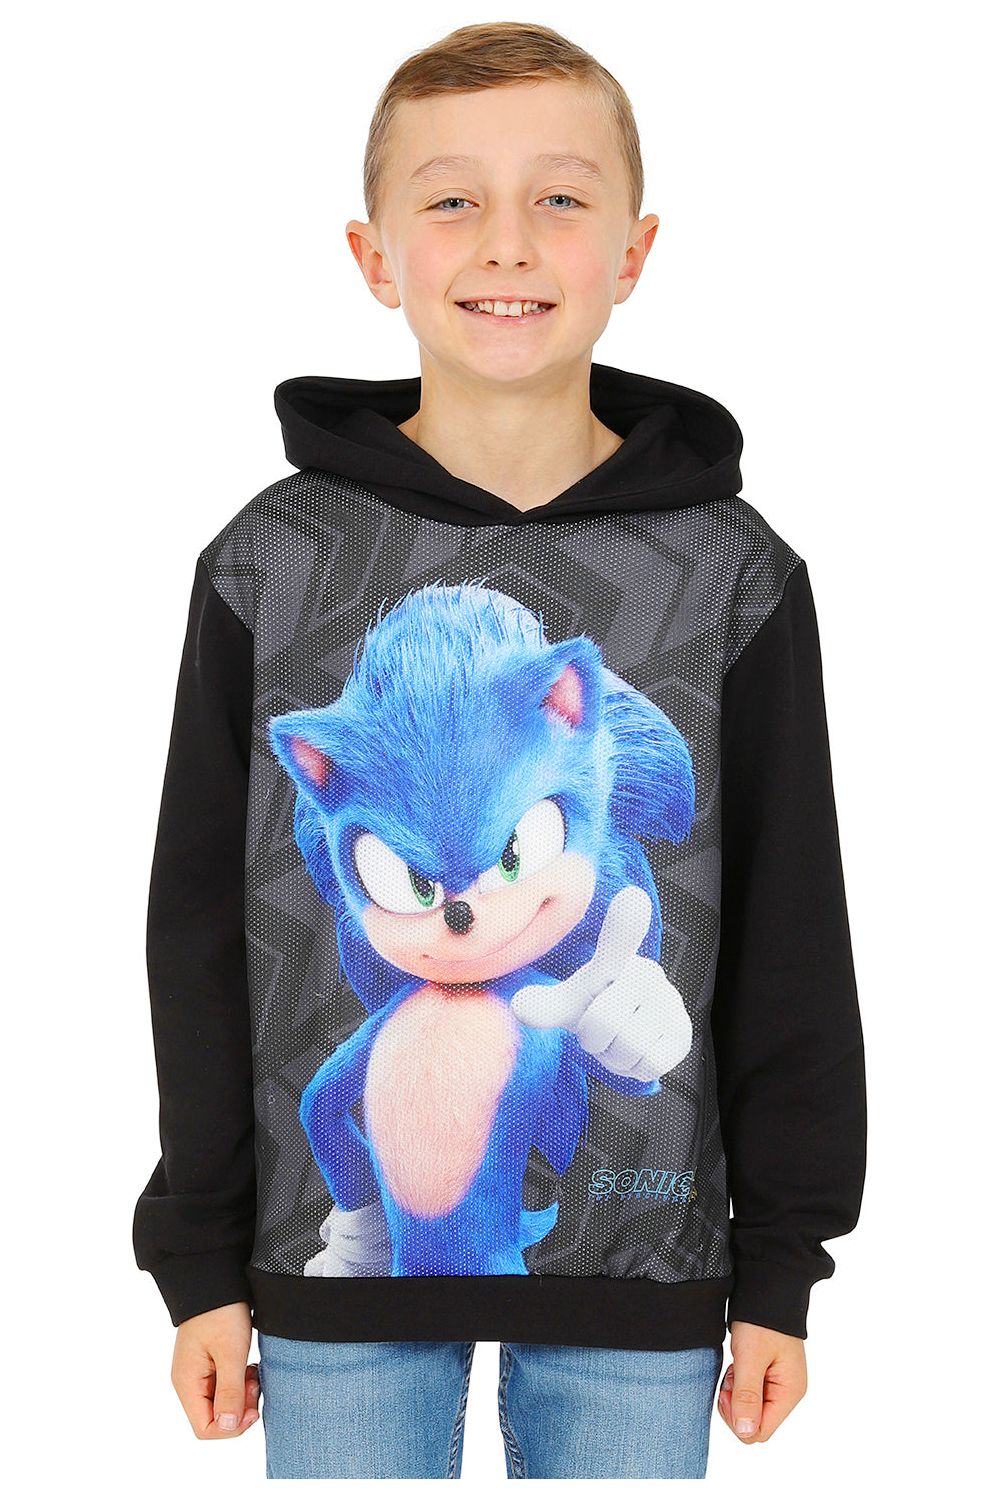 Official Sonic The Hedgehog Hooded Top Gaming Birthday Gift Kids Top Boys